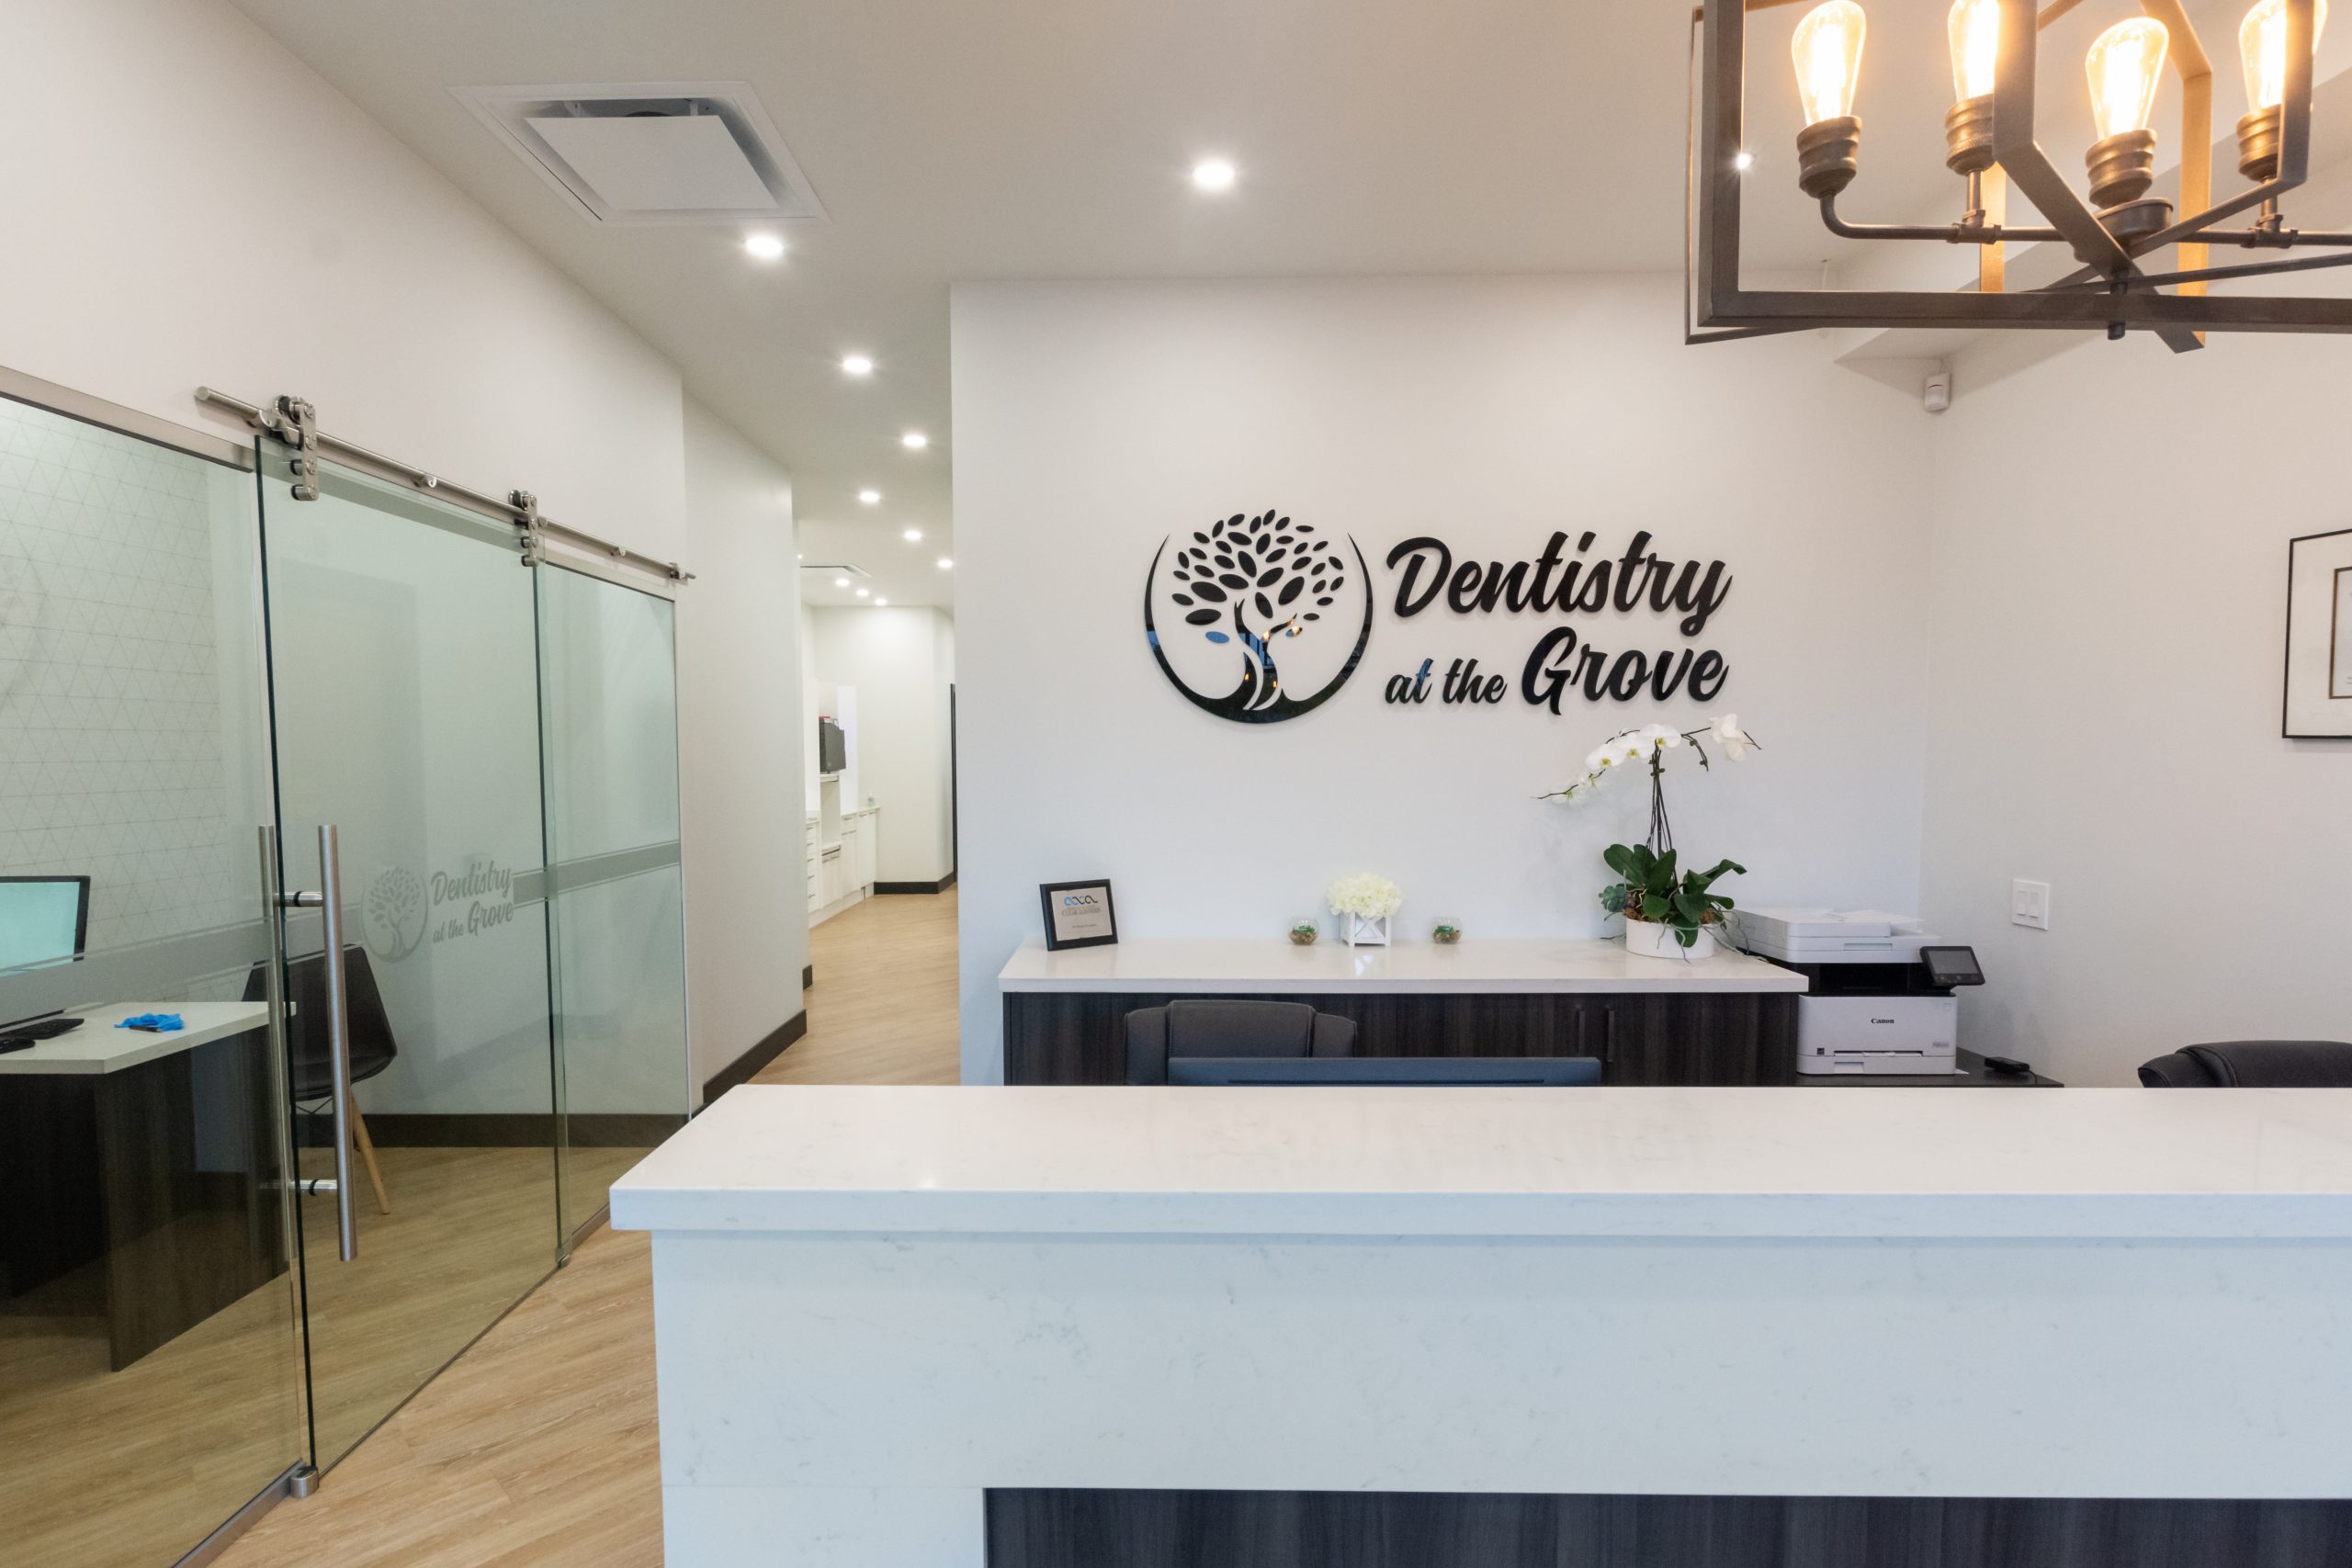 Dentistry at The Grove reception desk